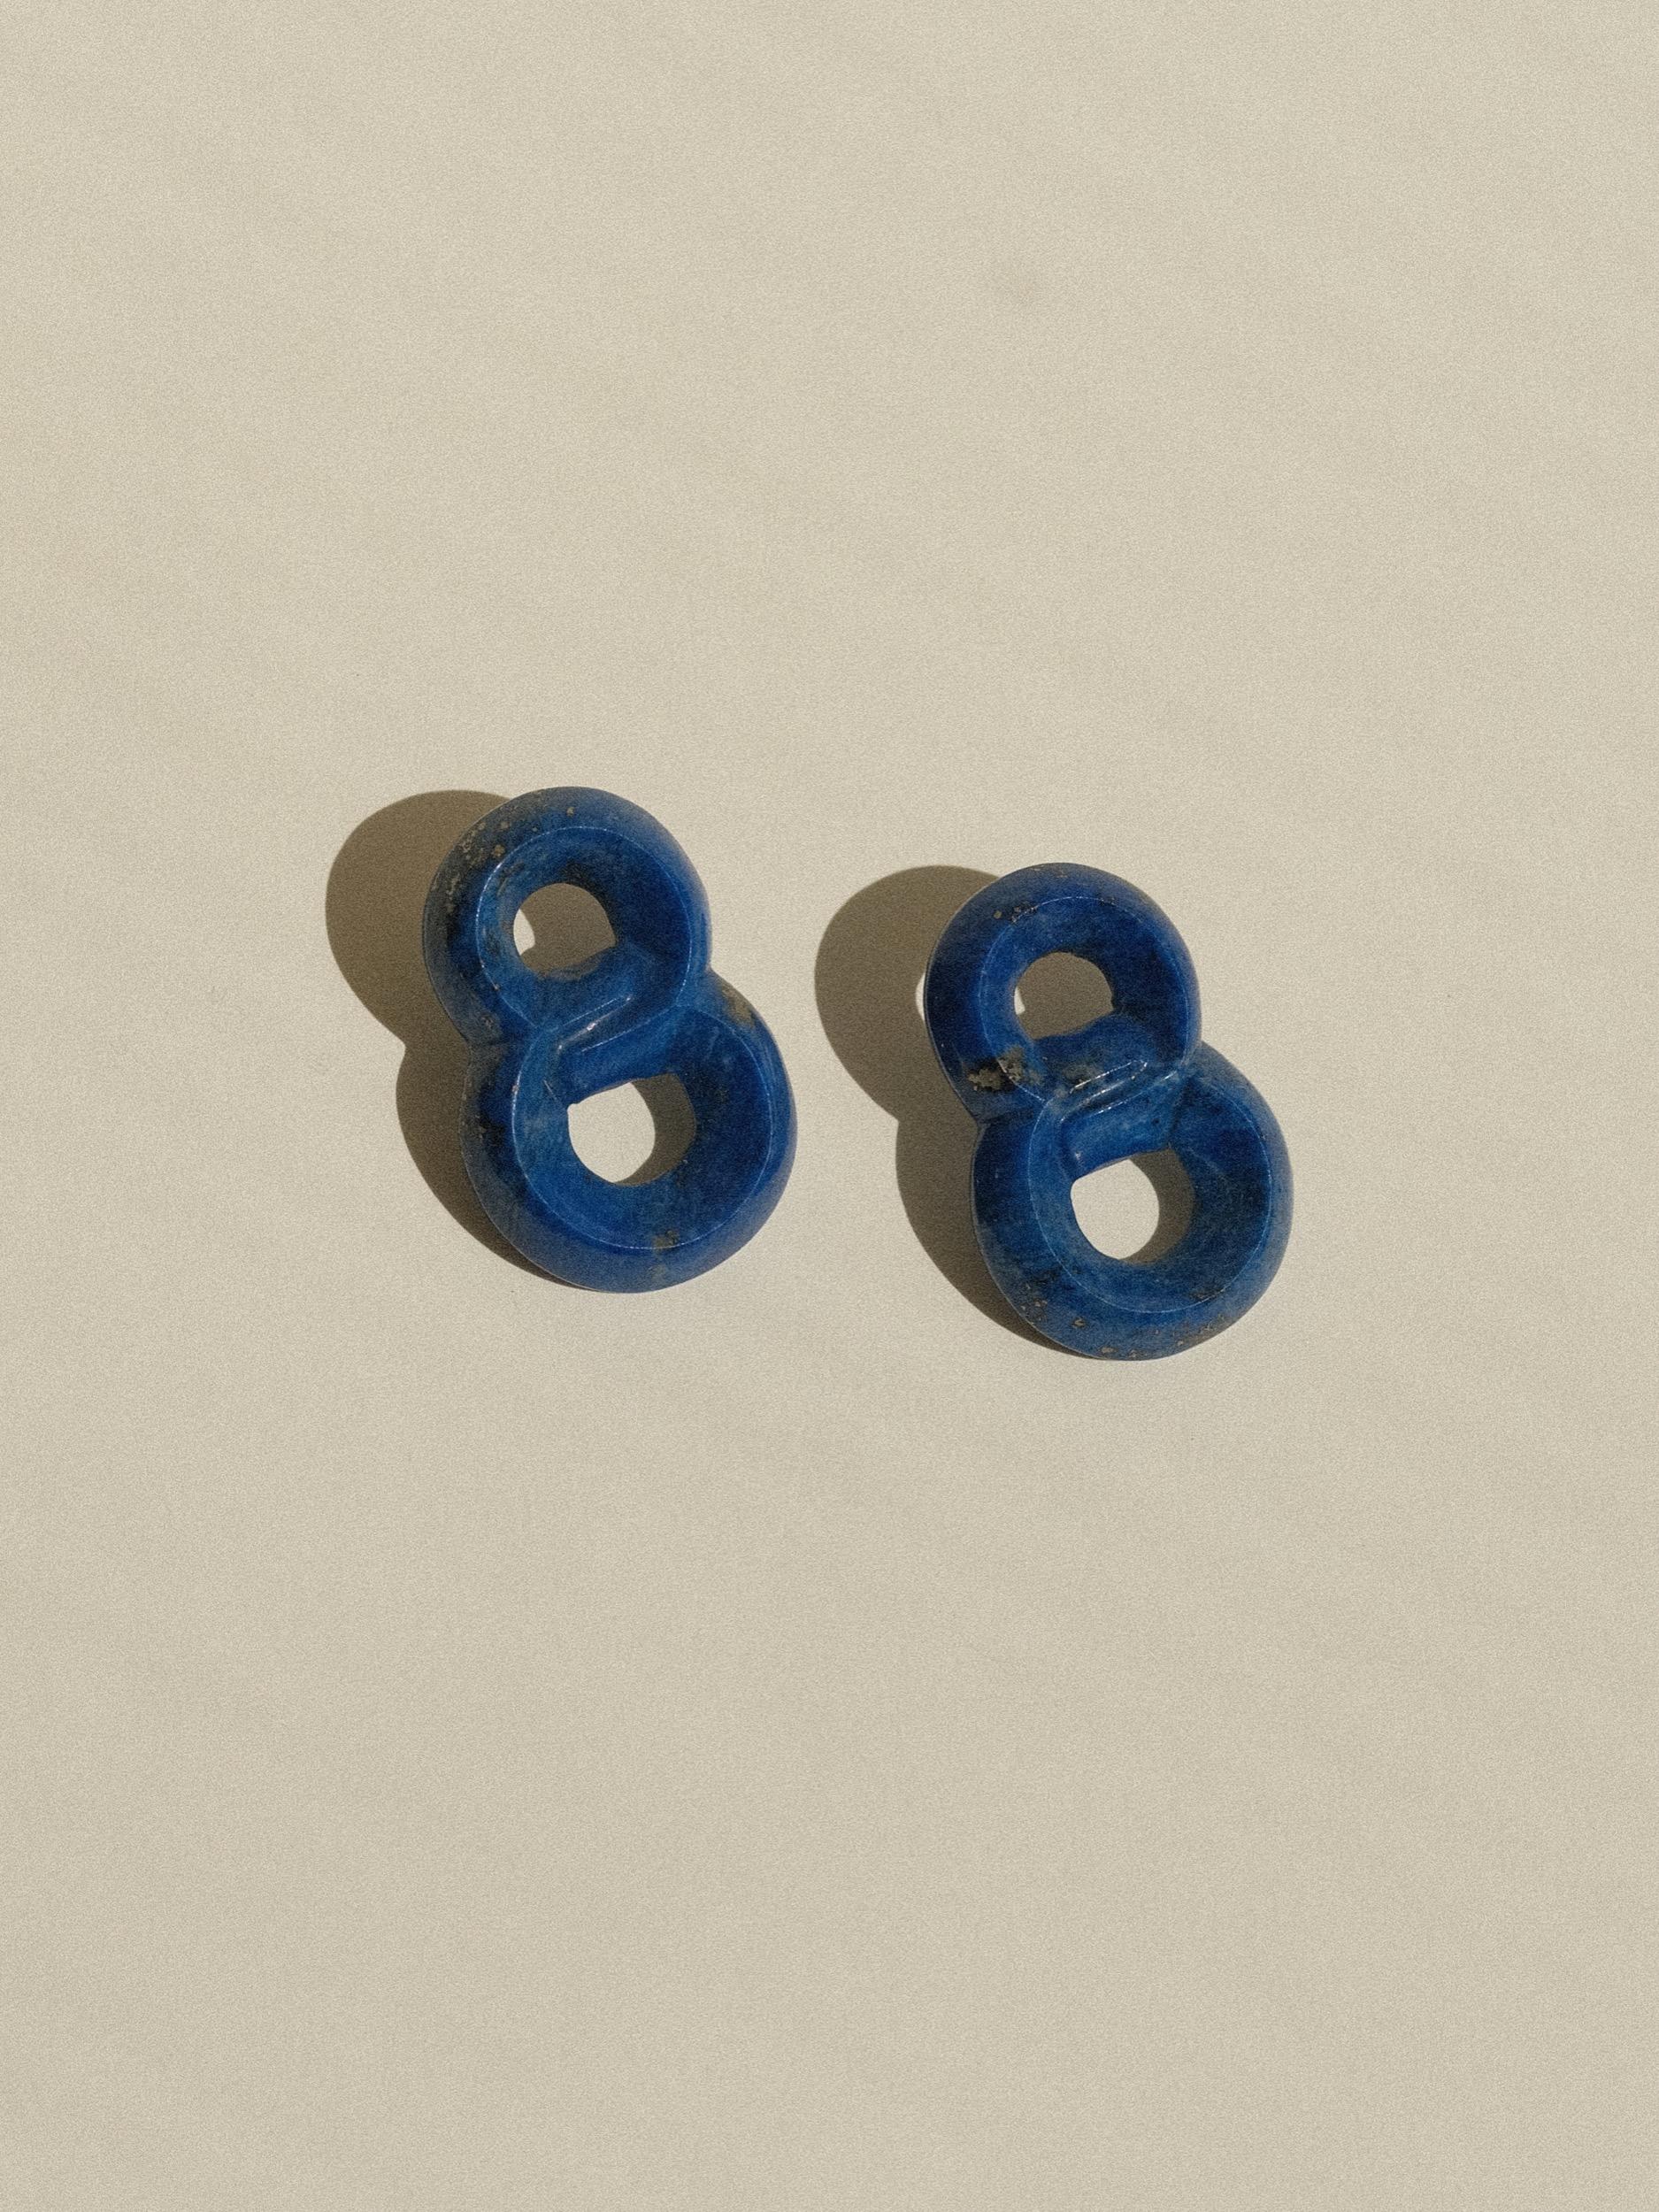 Hand-Carved Lapis Lazuli Earrings
Unmarked, From An Unknown Maker
Each measuring 1.5 Inches in length (drop) 
1 inch in width
Weighing 8 Grams Per Earring
Pierced back
In Excellent Condition